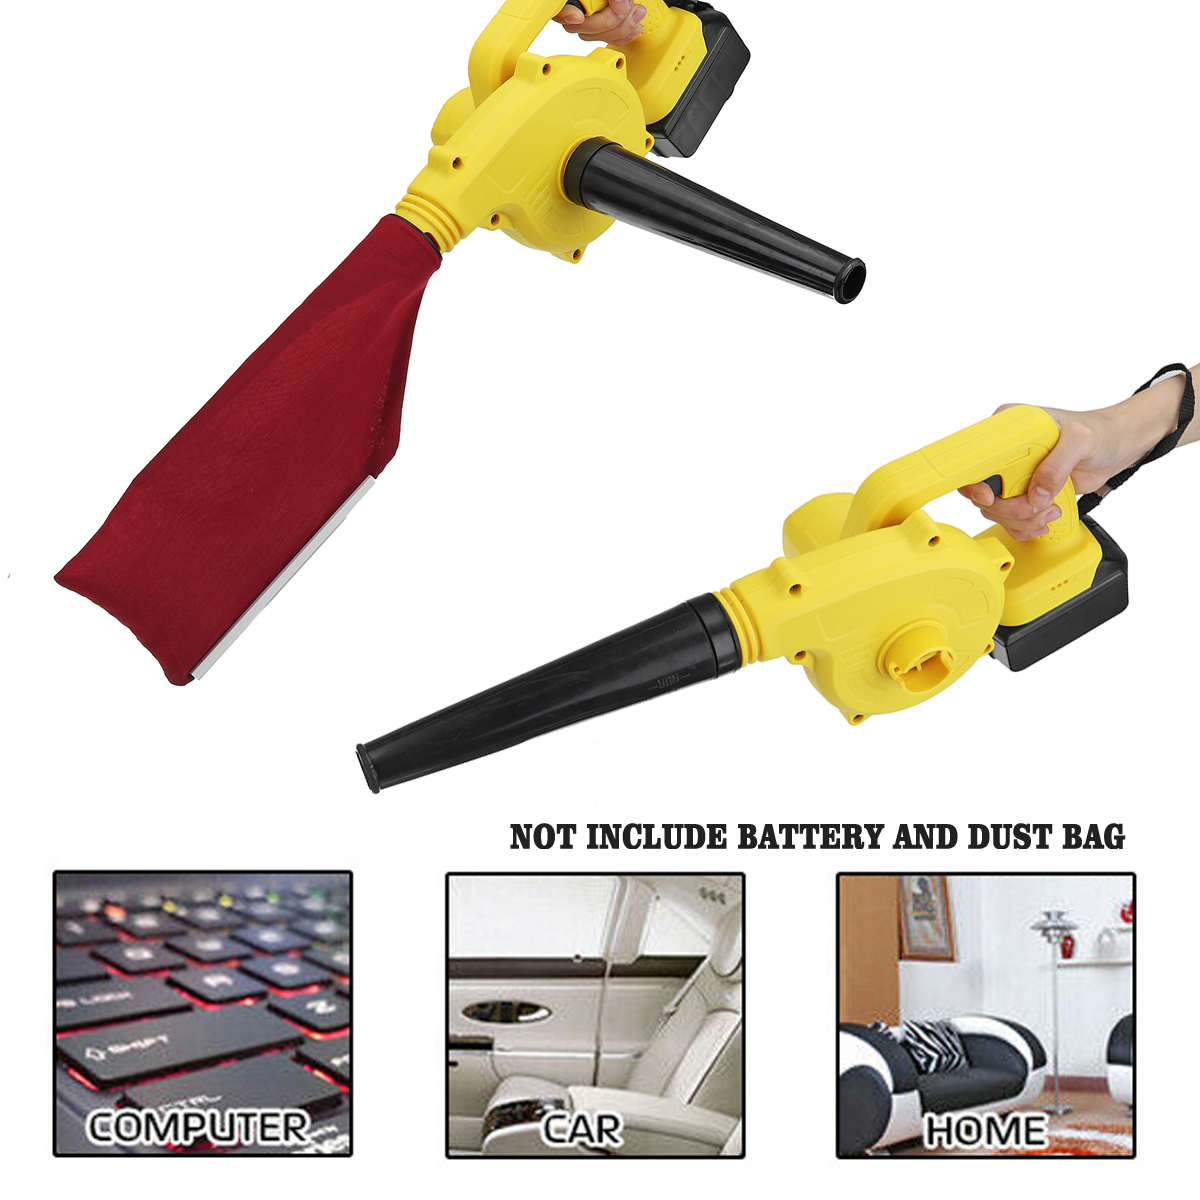 2-In-1-900W-Handheld-Home-Car-Air-Vacuum-Blower-Dust-Suction-Collector-Cleaner-1673787-5